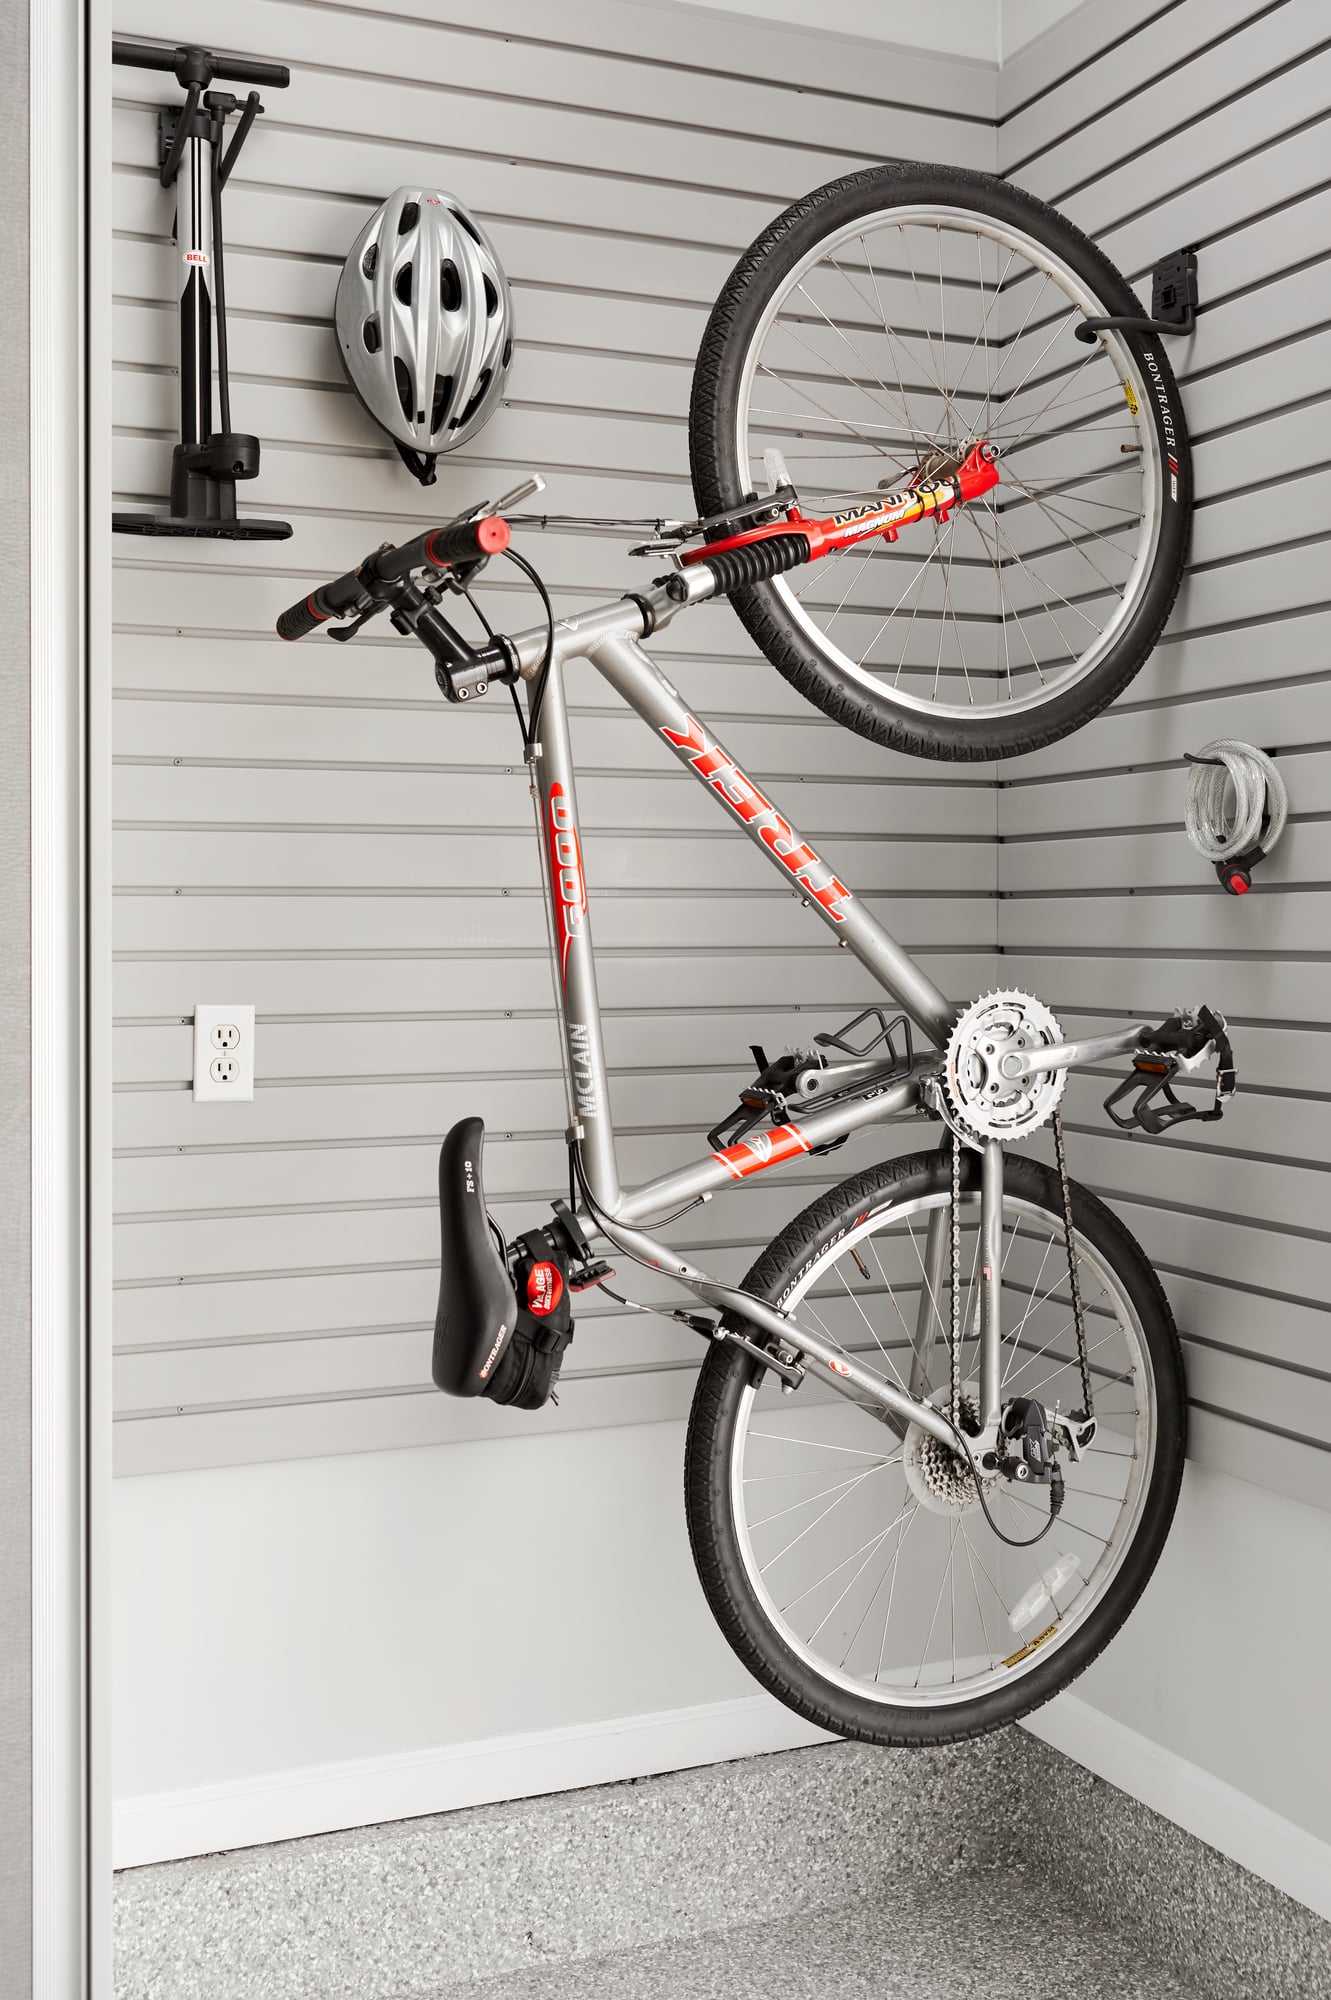 Custom Garage Storage with Sliding Cabinets, Slatwall and Hanging Accessories